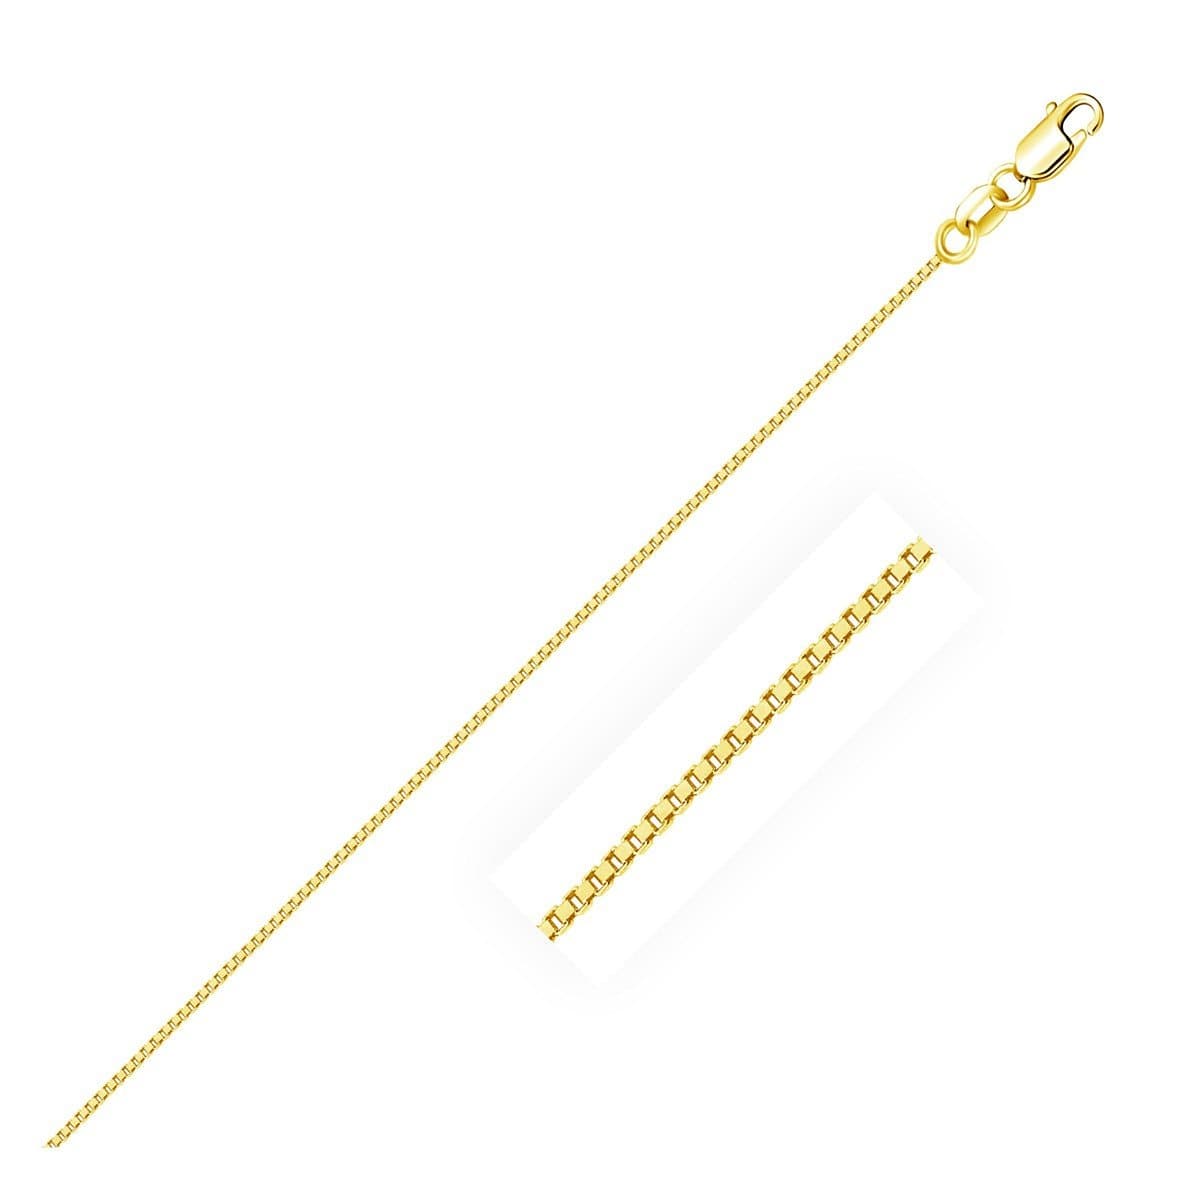 18k Yellow Gold Box Chain in 0.6 mm